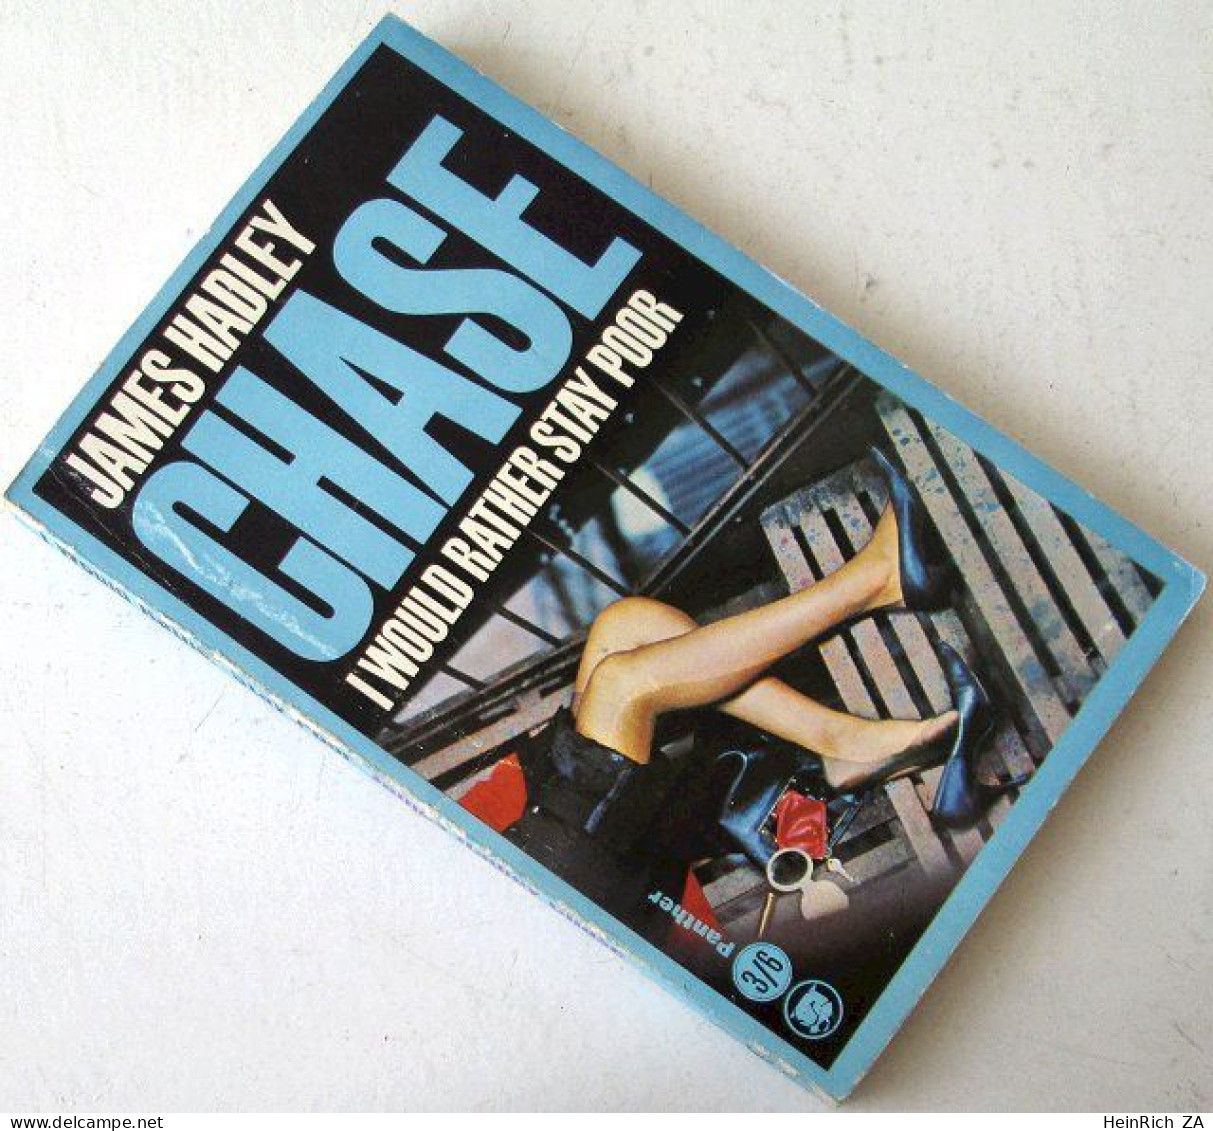 James Hadley Chase - I Would Rather Stay Poor - Crimes Véritables